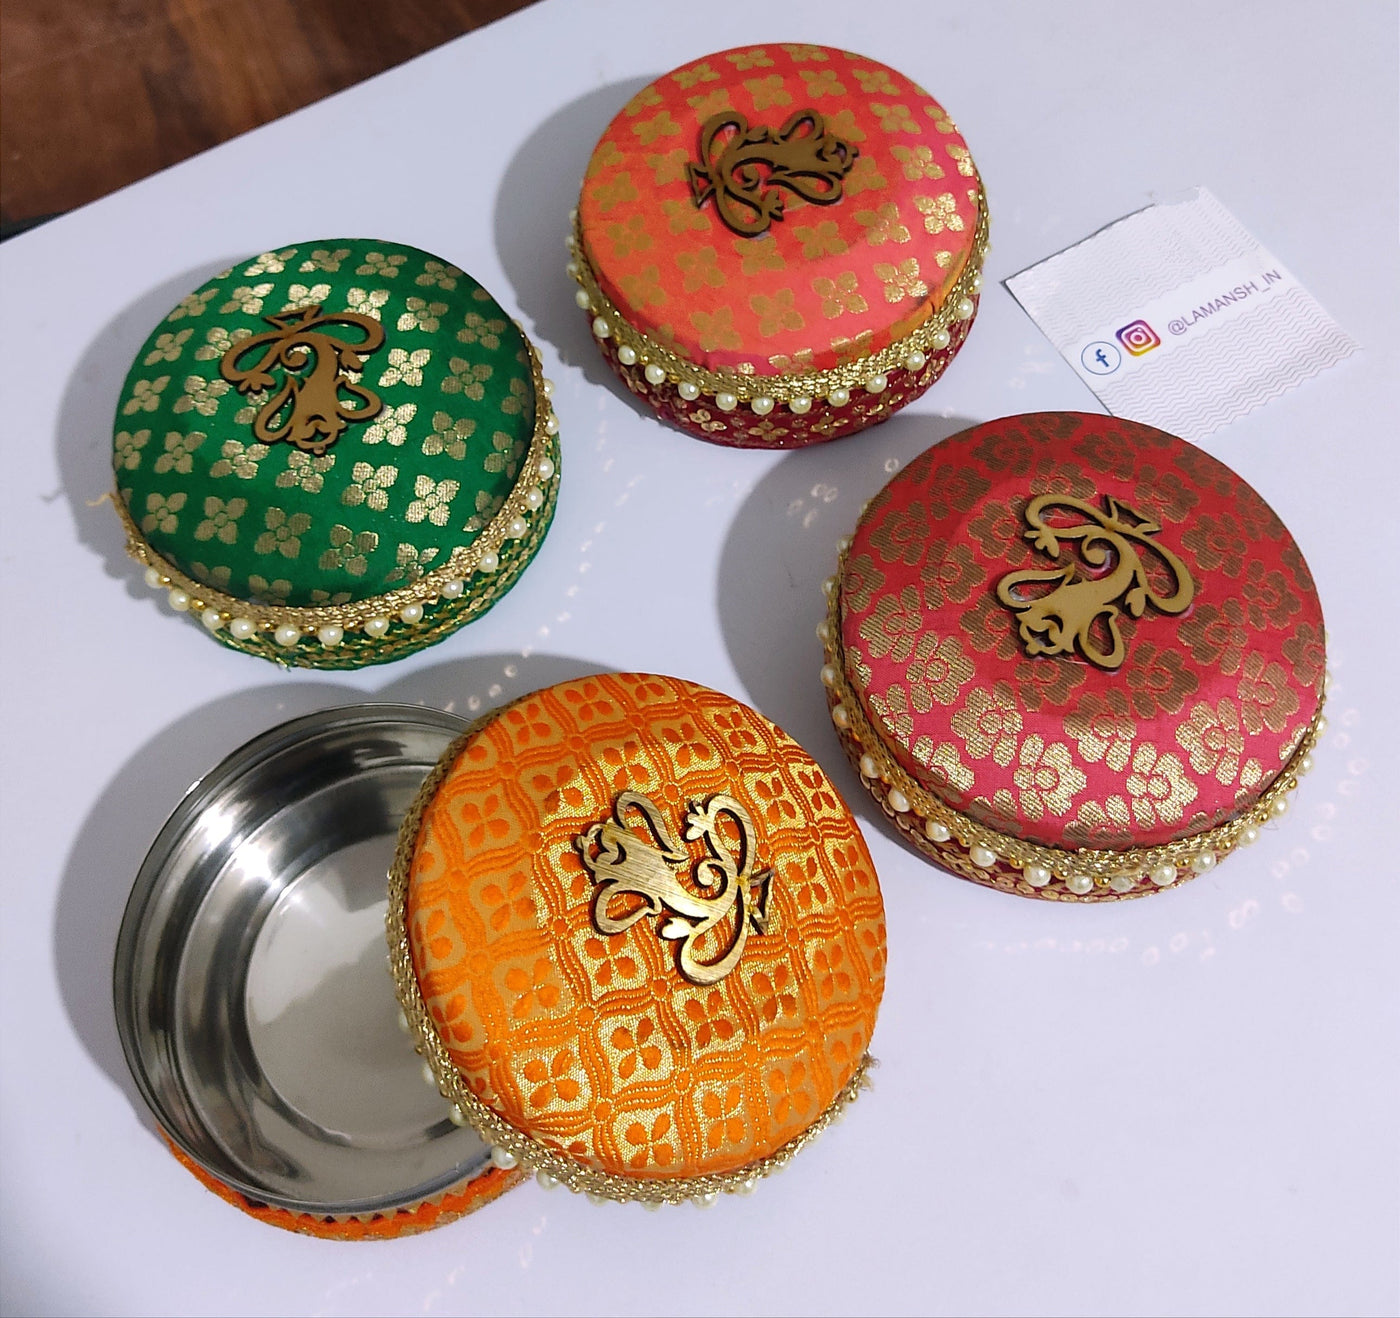 120 rs each on purchasing in bulk at 8619550223 steel gift box lamansh 5 inch stainless steel designer ladoo box for return gifting gift boxes with ganeshji mdf cutout for wedding poo df16f735 a247 4f7a 99d0